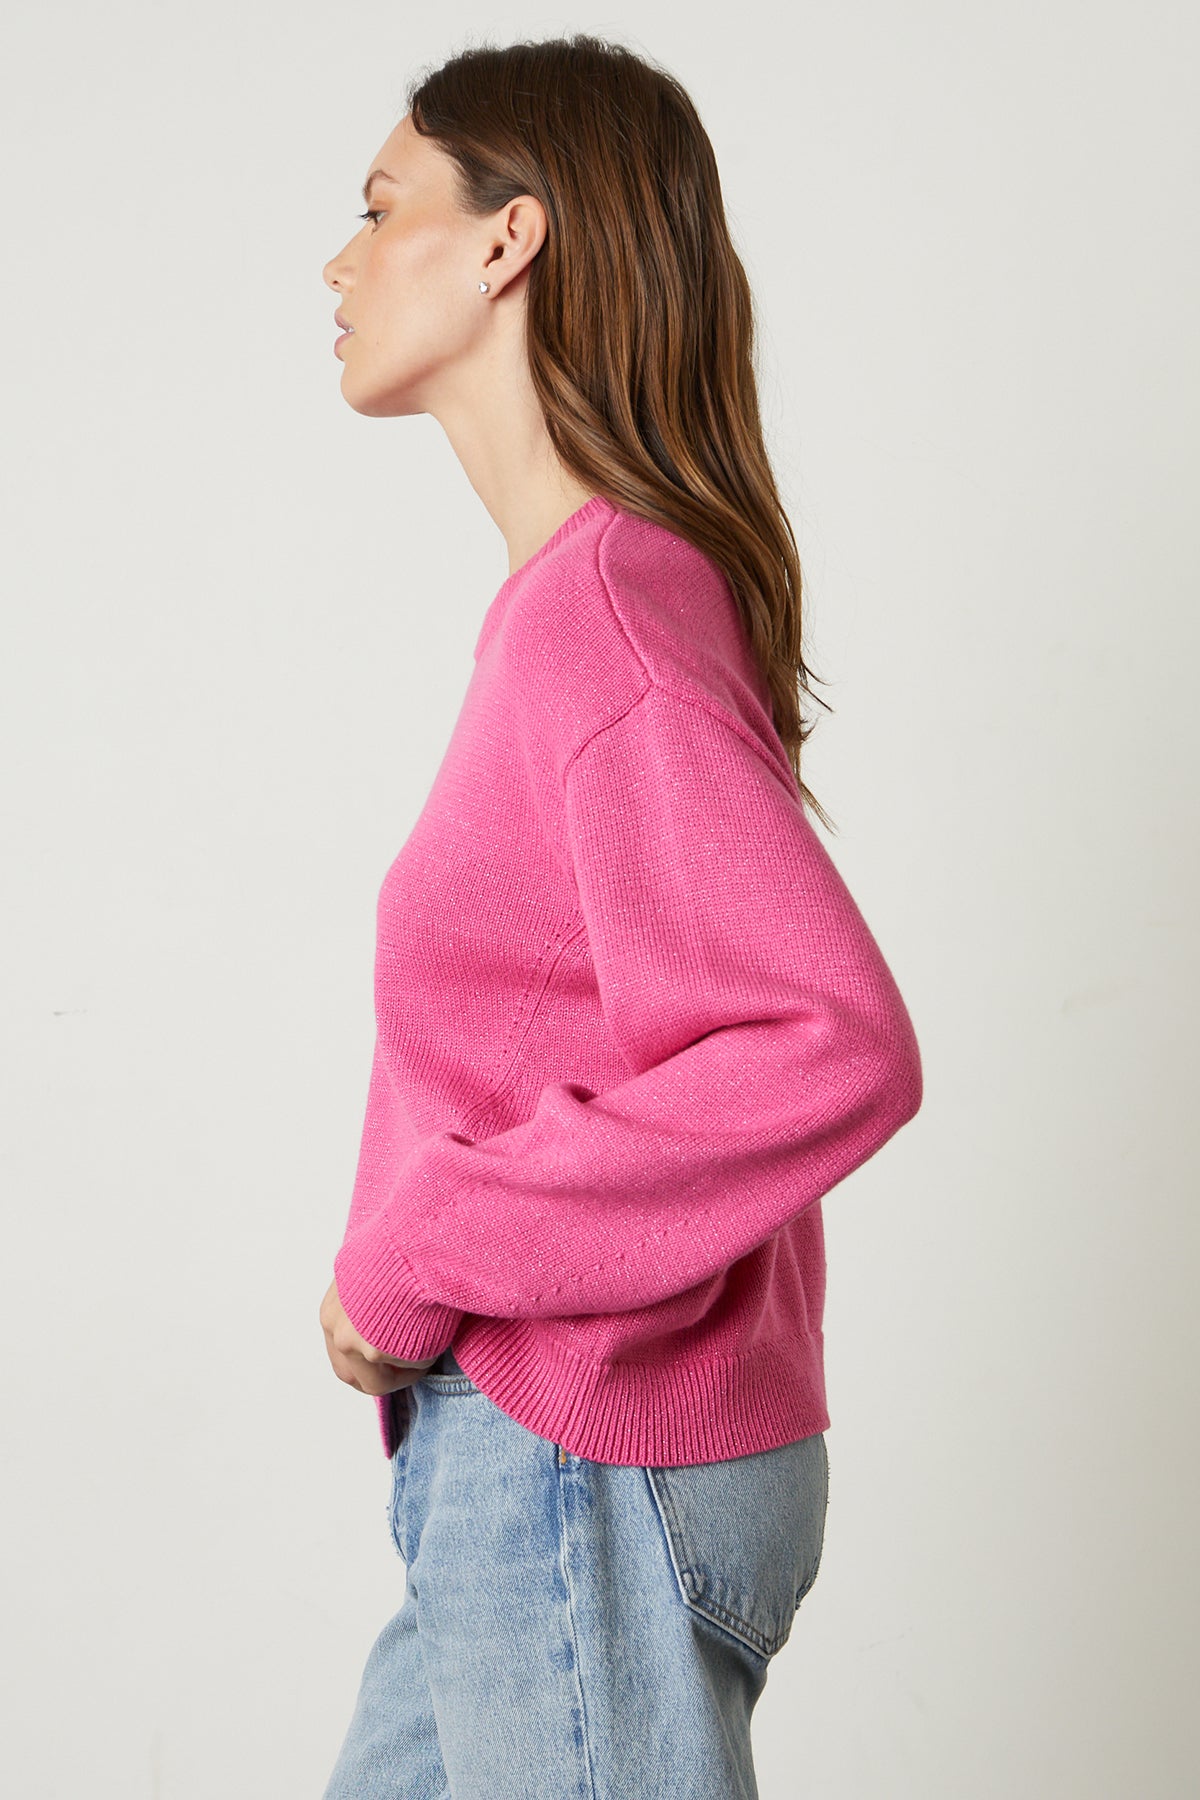   Hallie Crew Neck Sweater in bright candy pink with blue denim side 